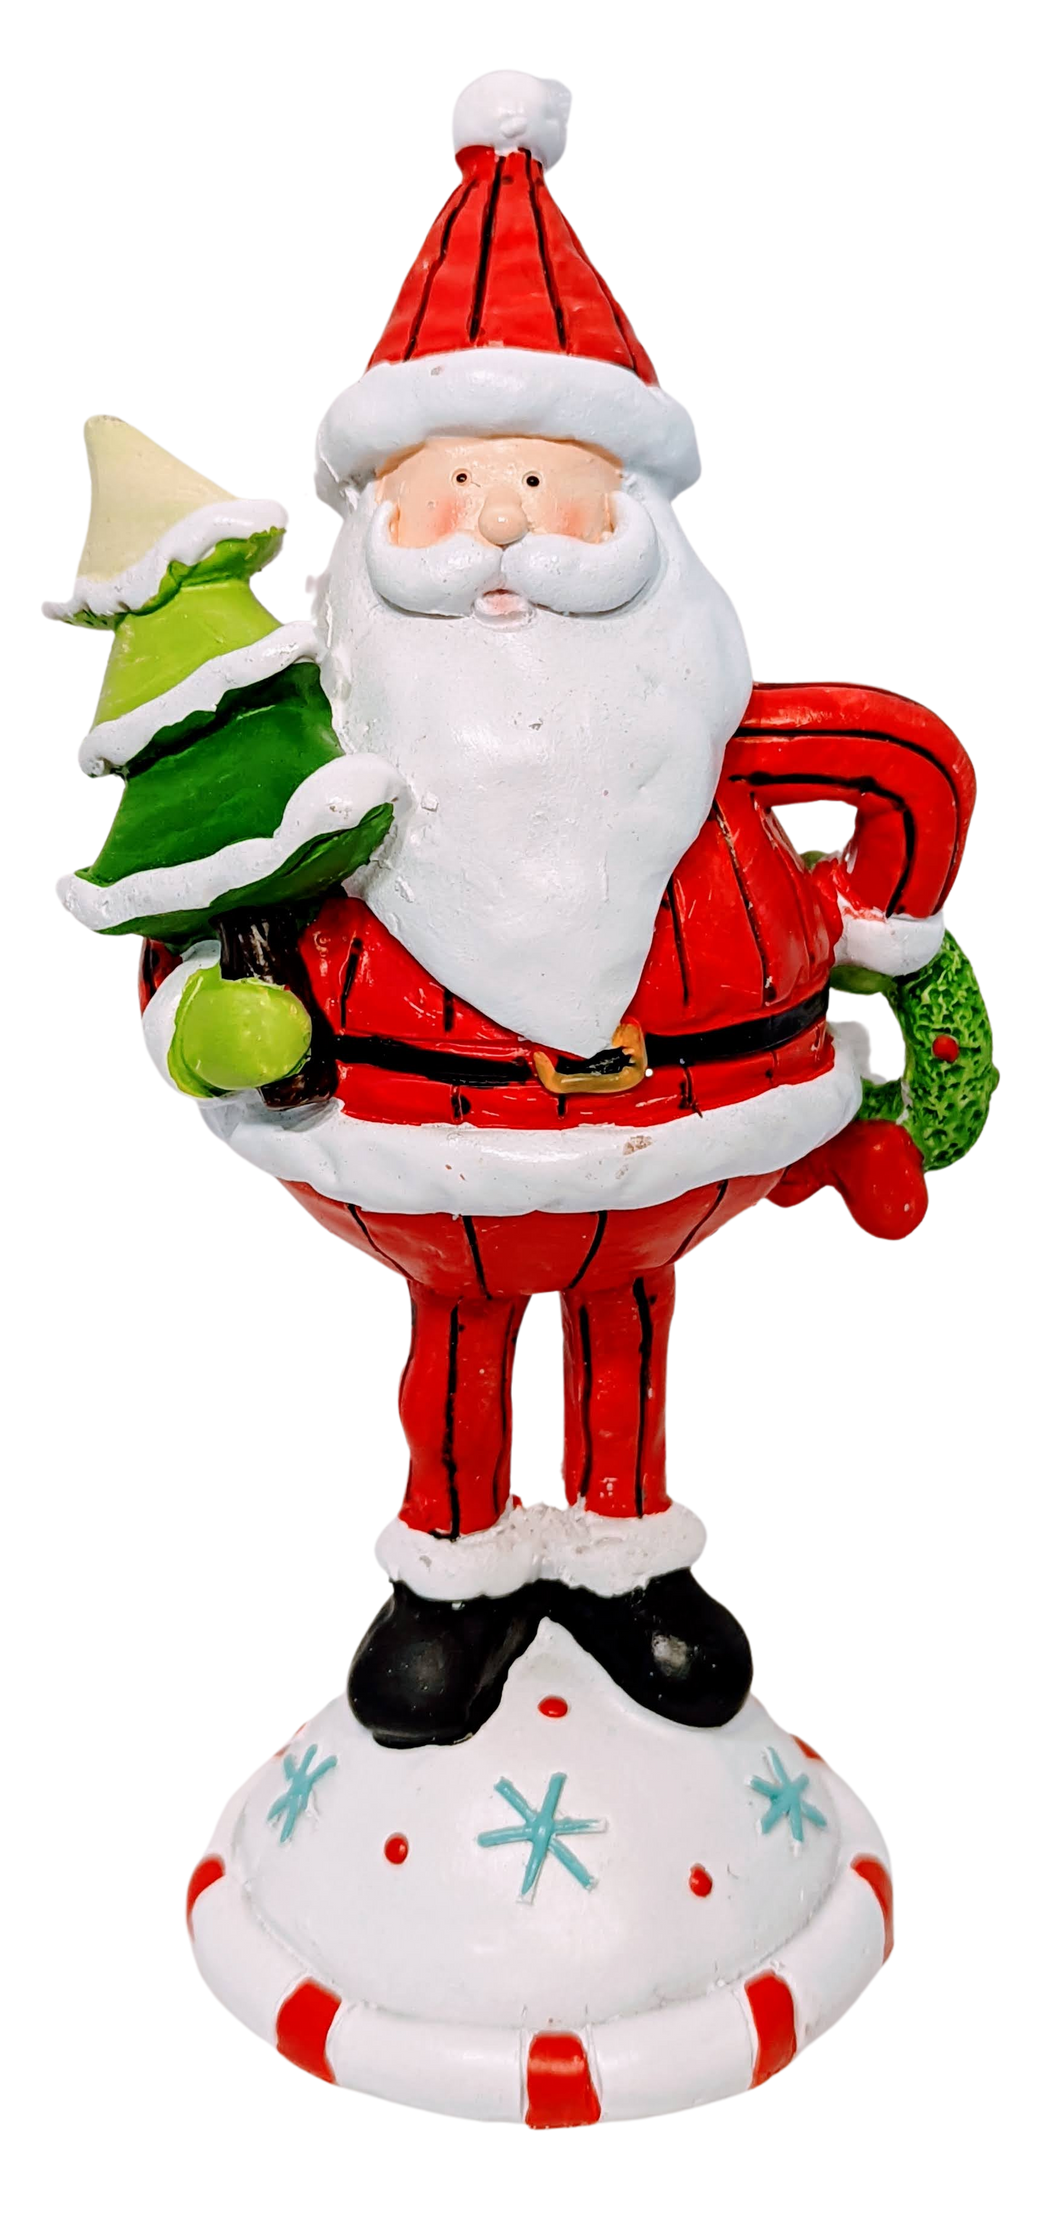 Santa Figurine with Christmas Tree & Wreath or Sack of Presents or Snowman